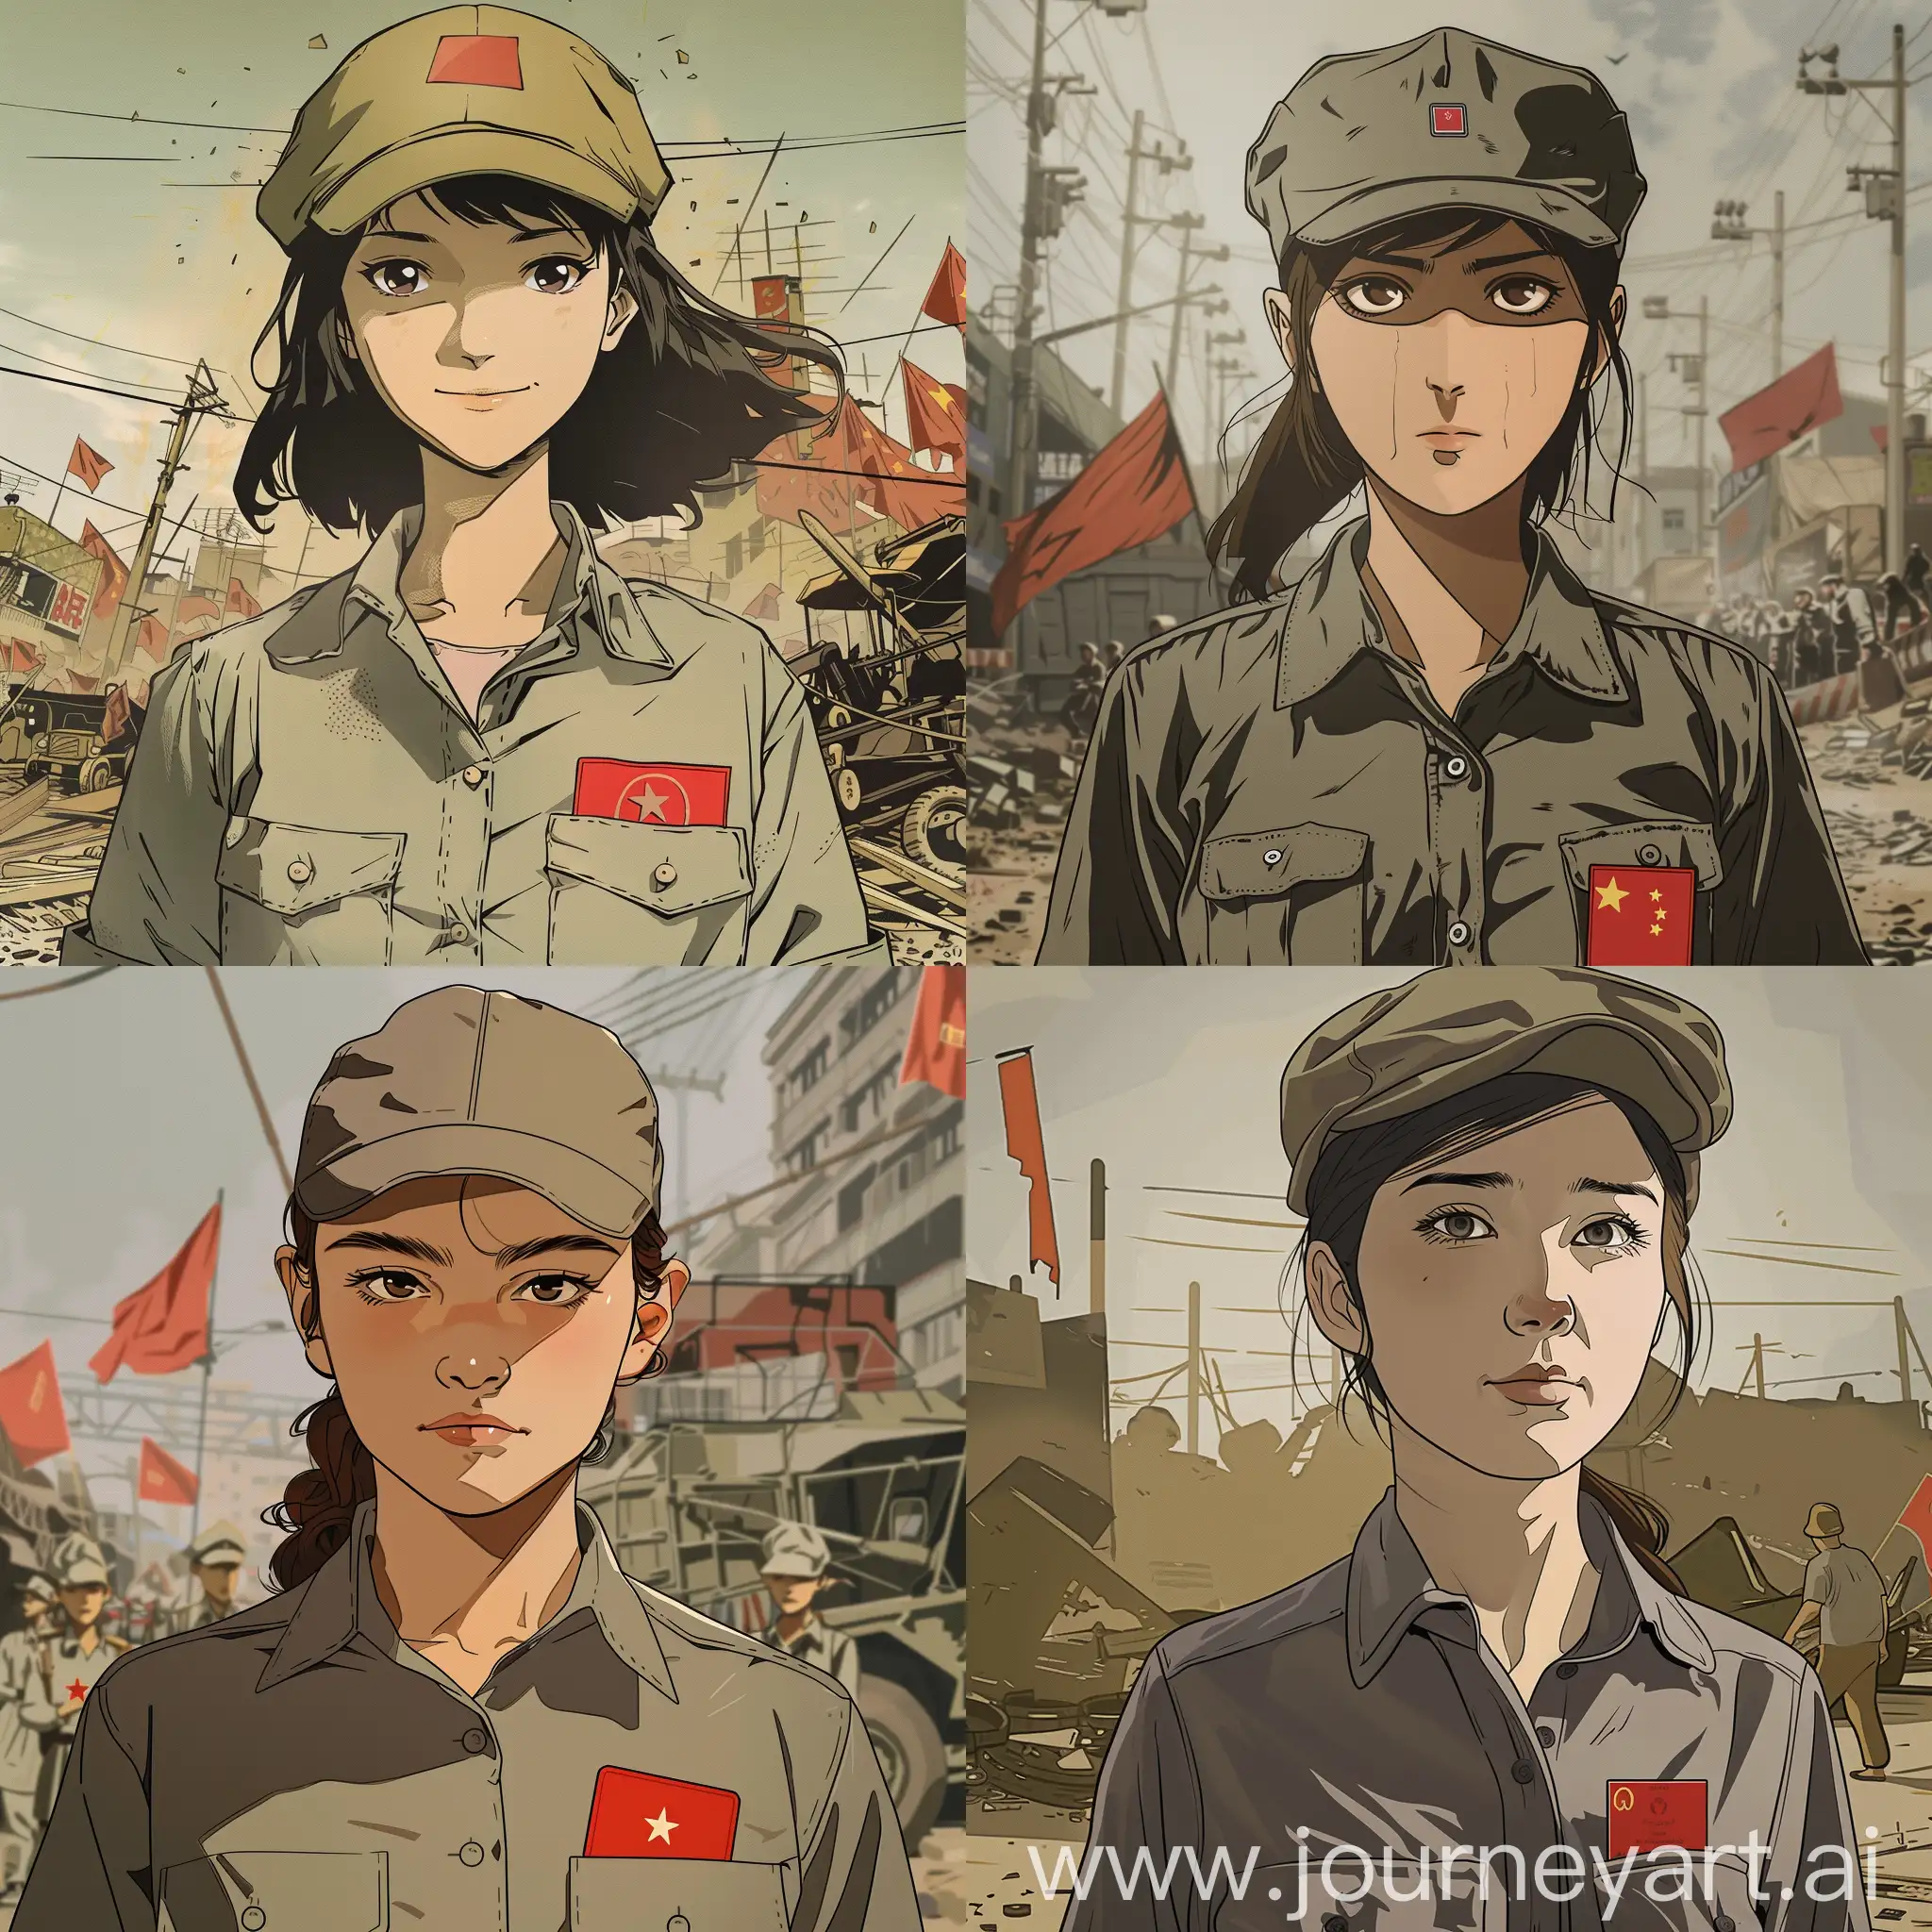 Calm-Communist-Woman-Amid-Workers-Strike-Anime-Style